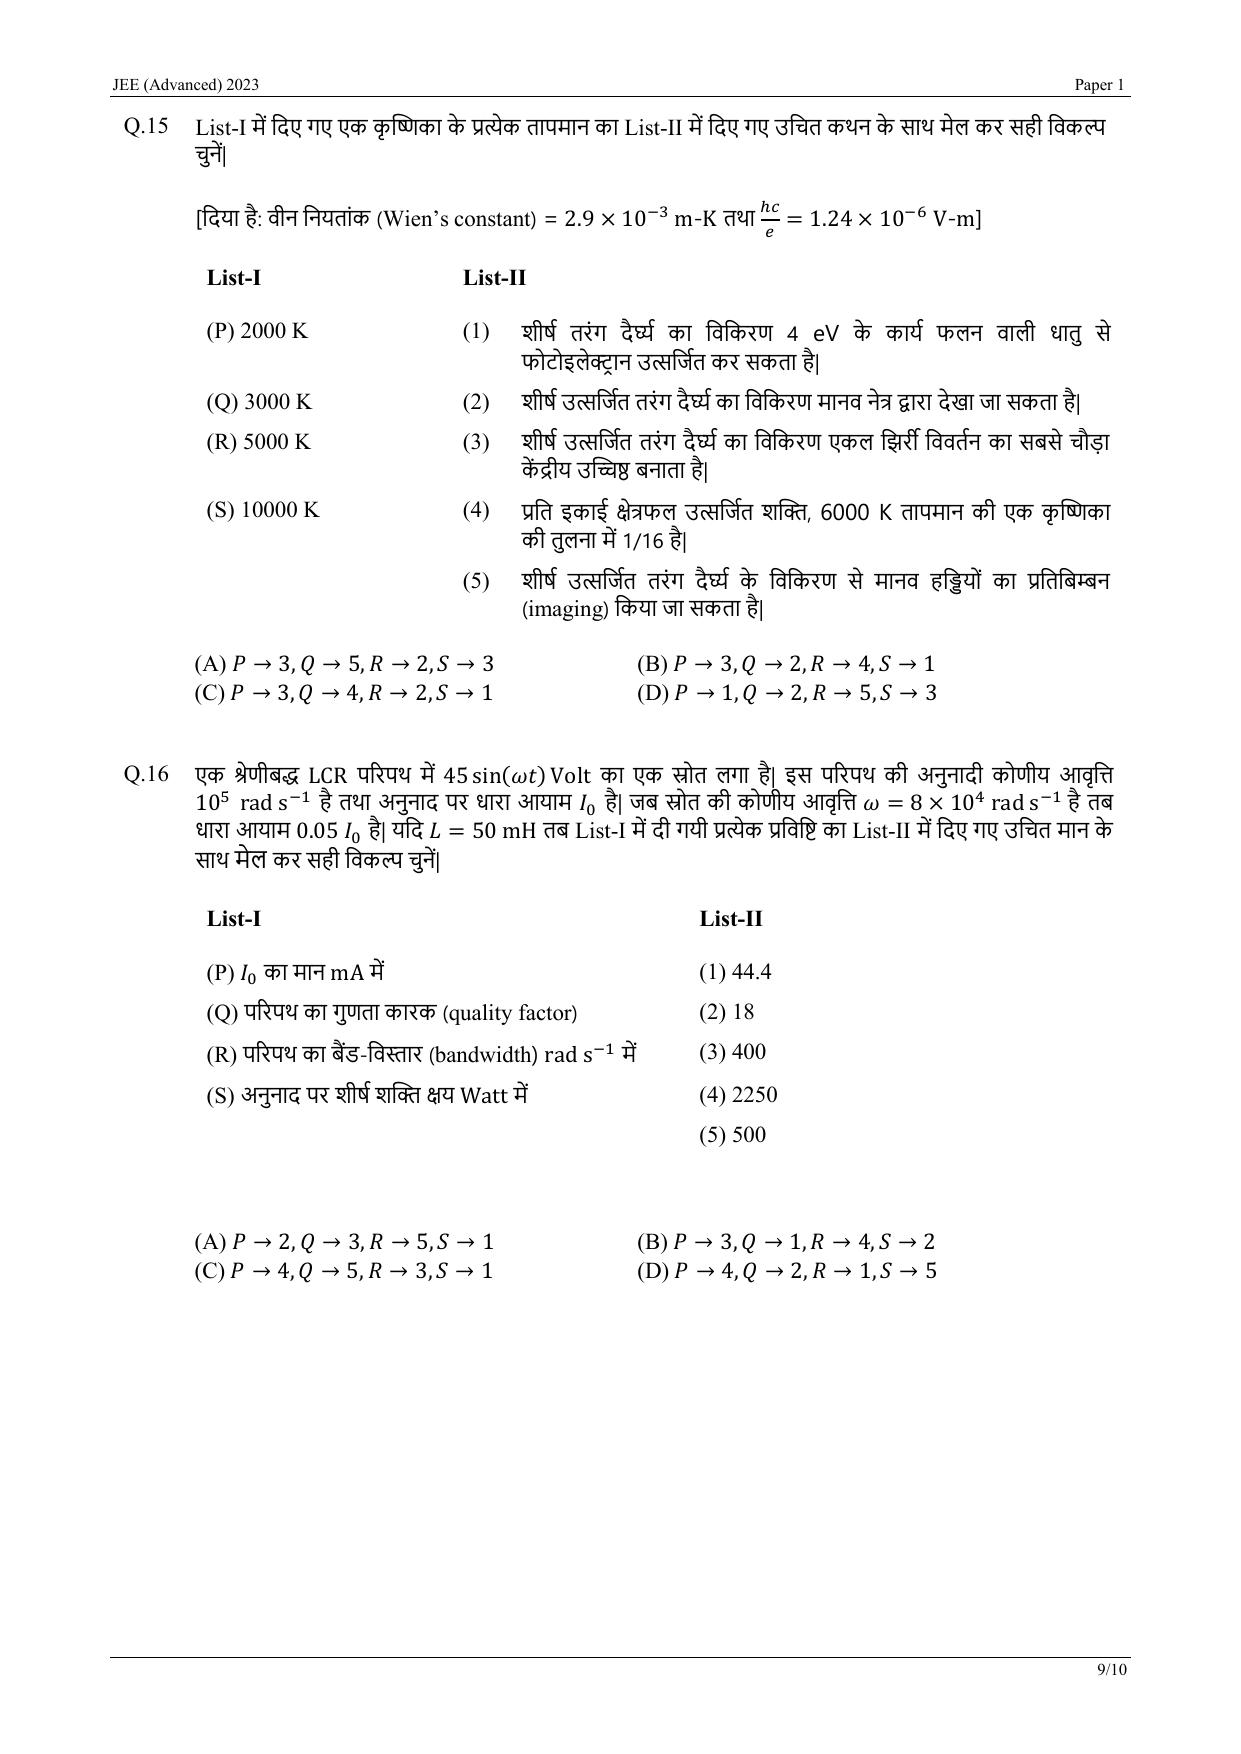 JEE Advanced 2023 Question Paper 1 (Hindi) - Page 19